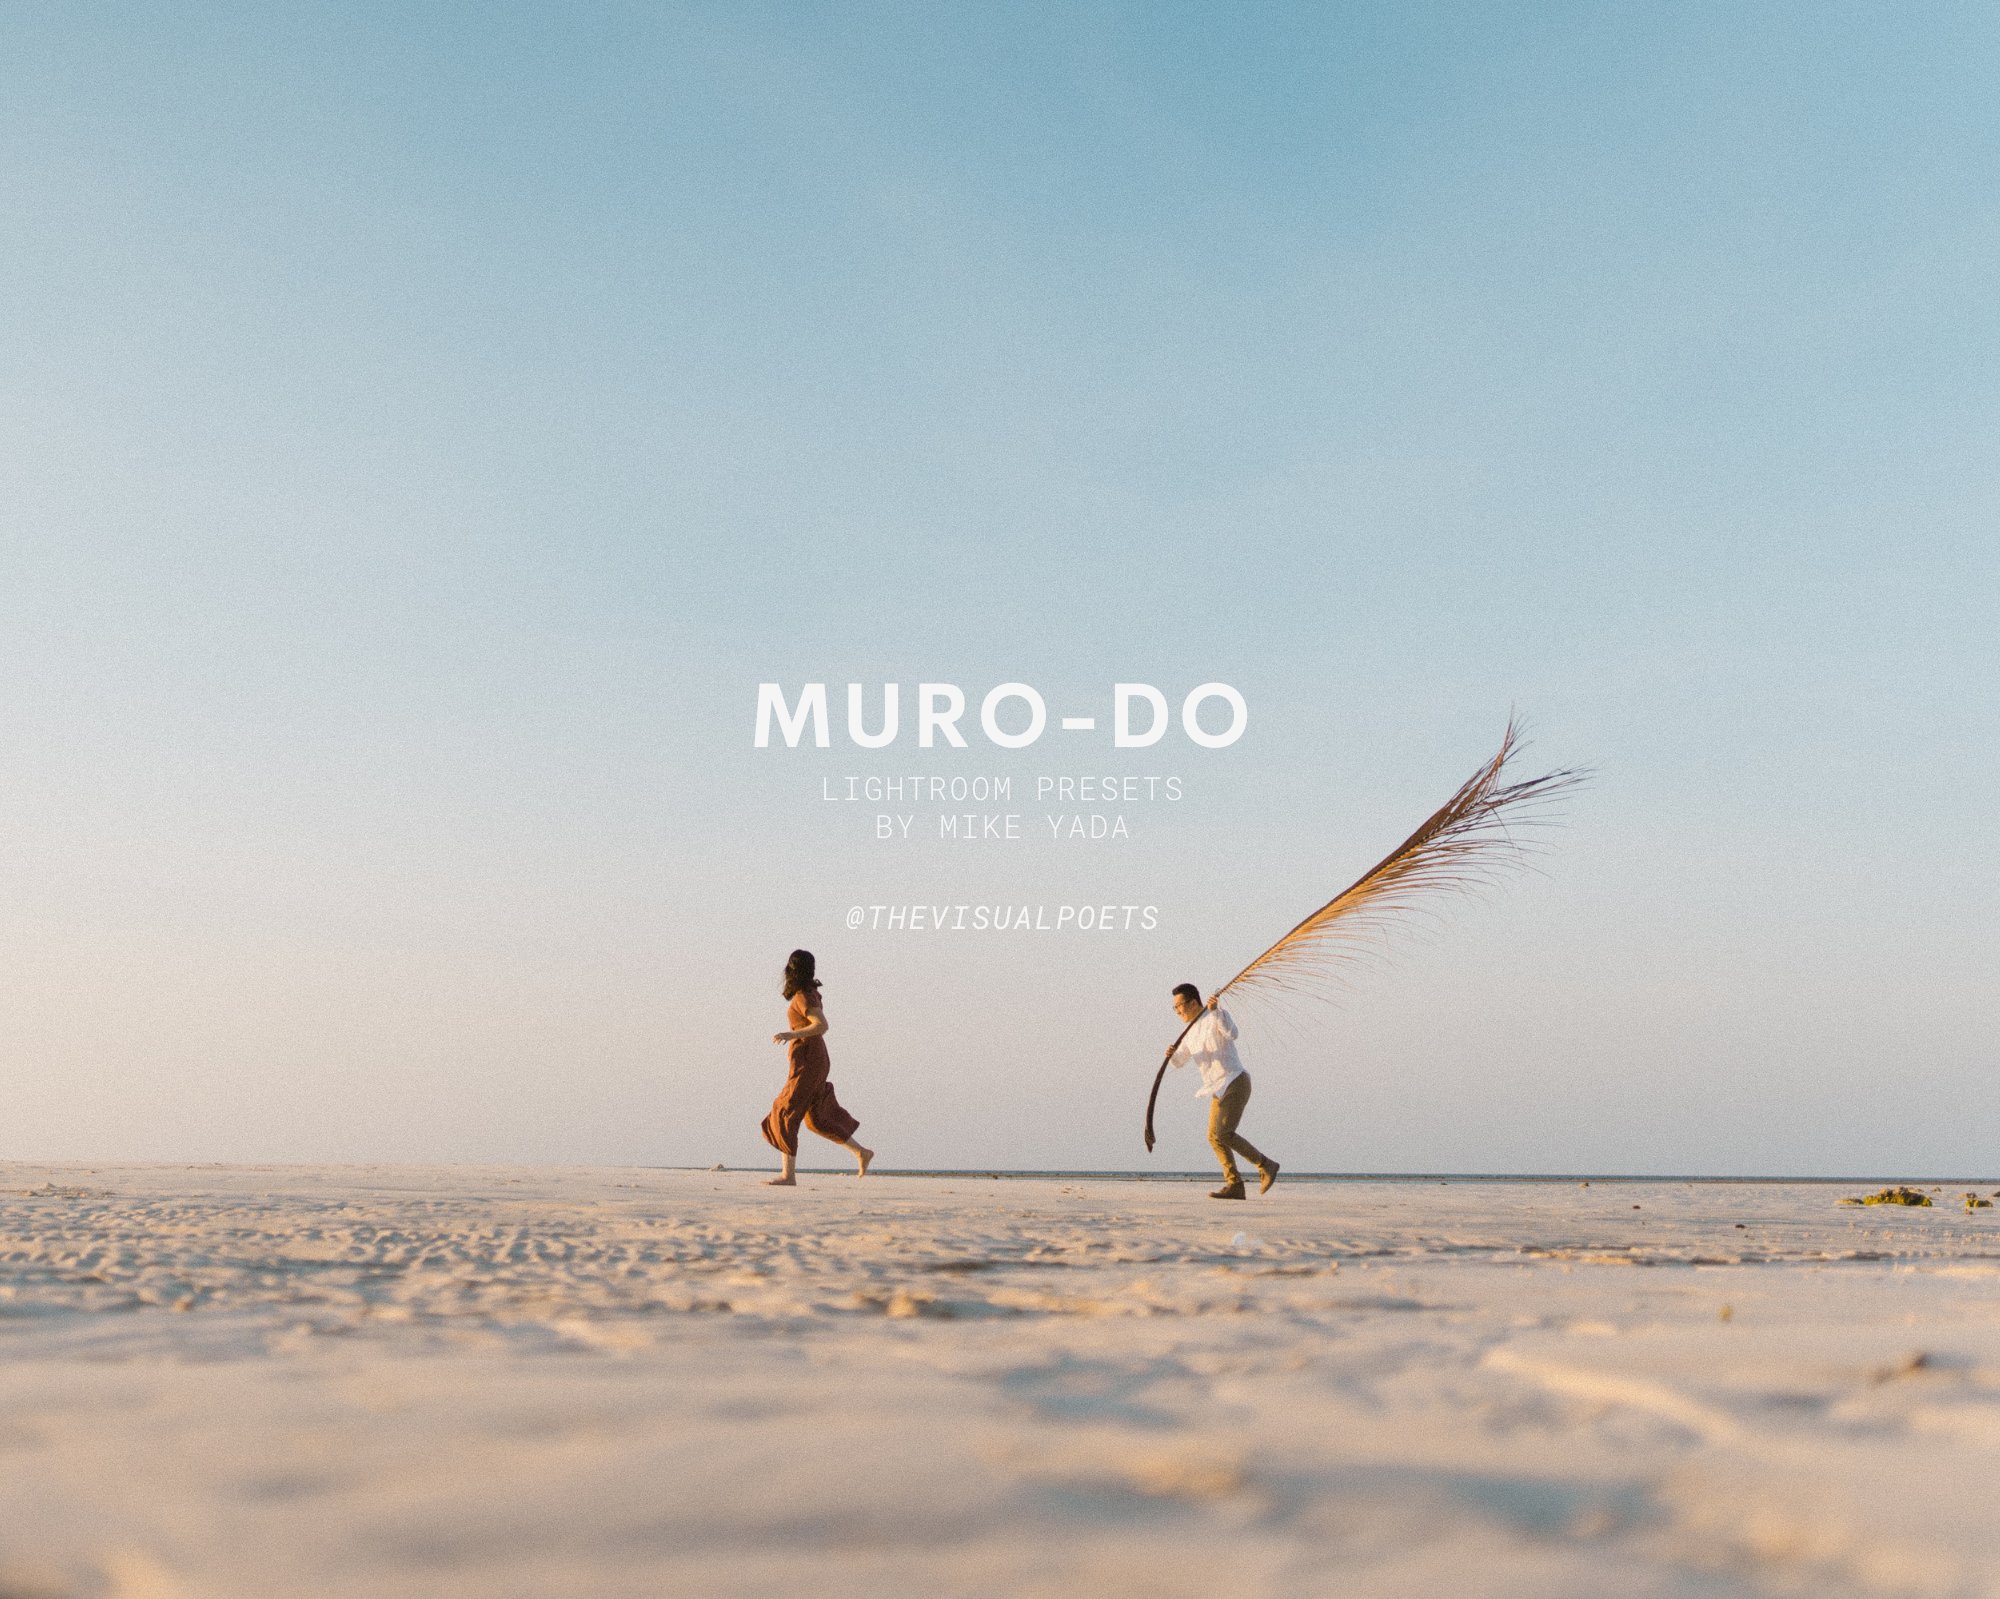 Sunset and Blue Hour Wedding Presets by Mike Yada Muro-Do Presets from The Visual Poets